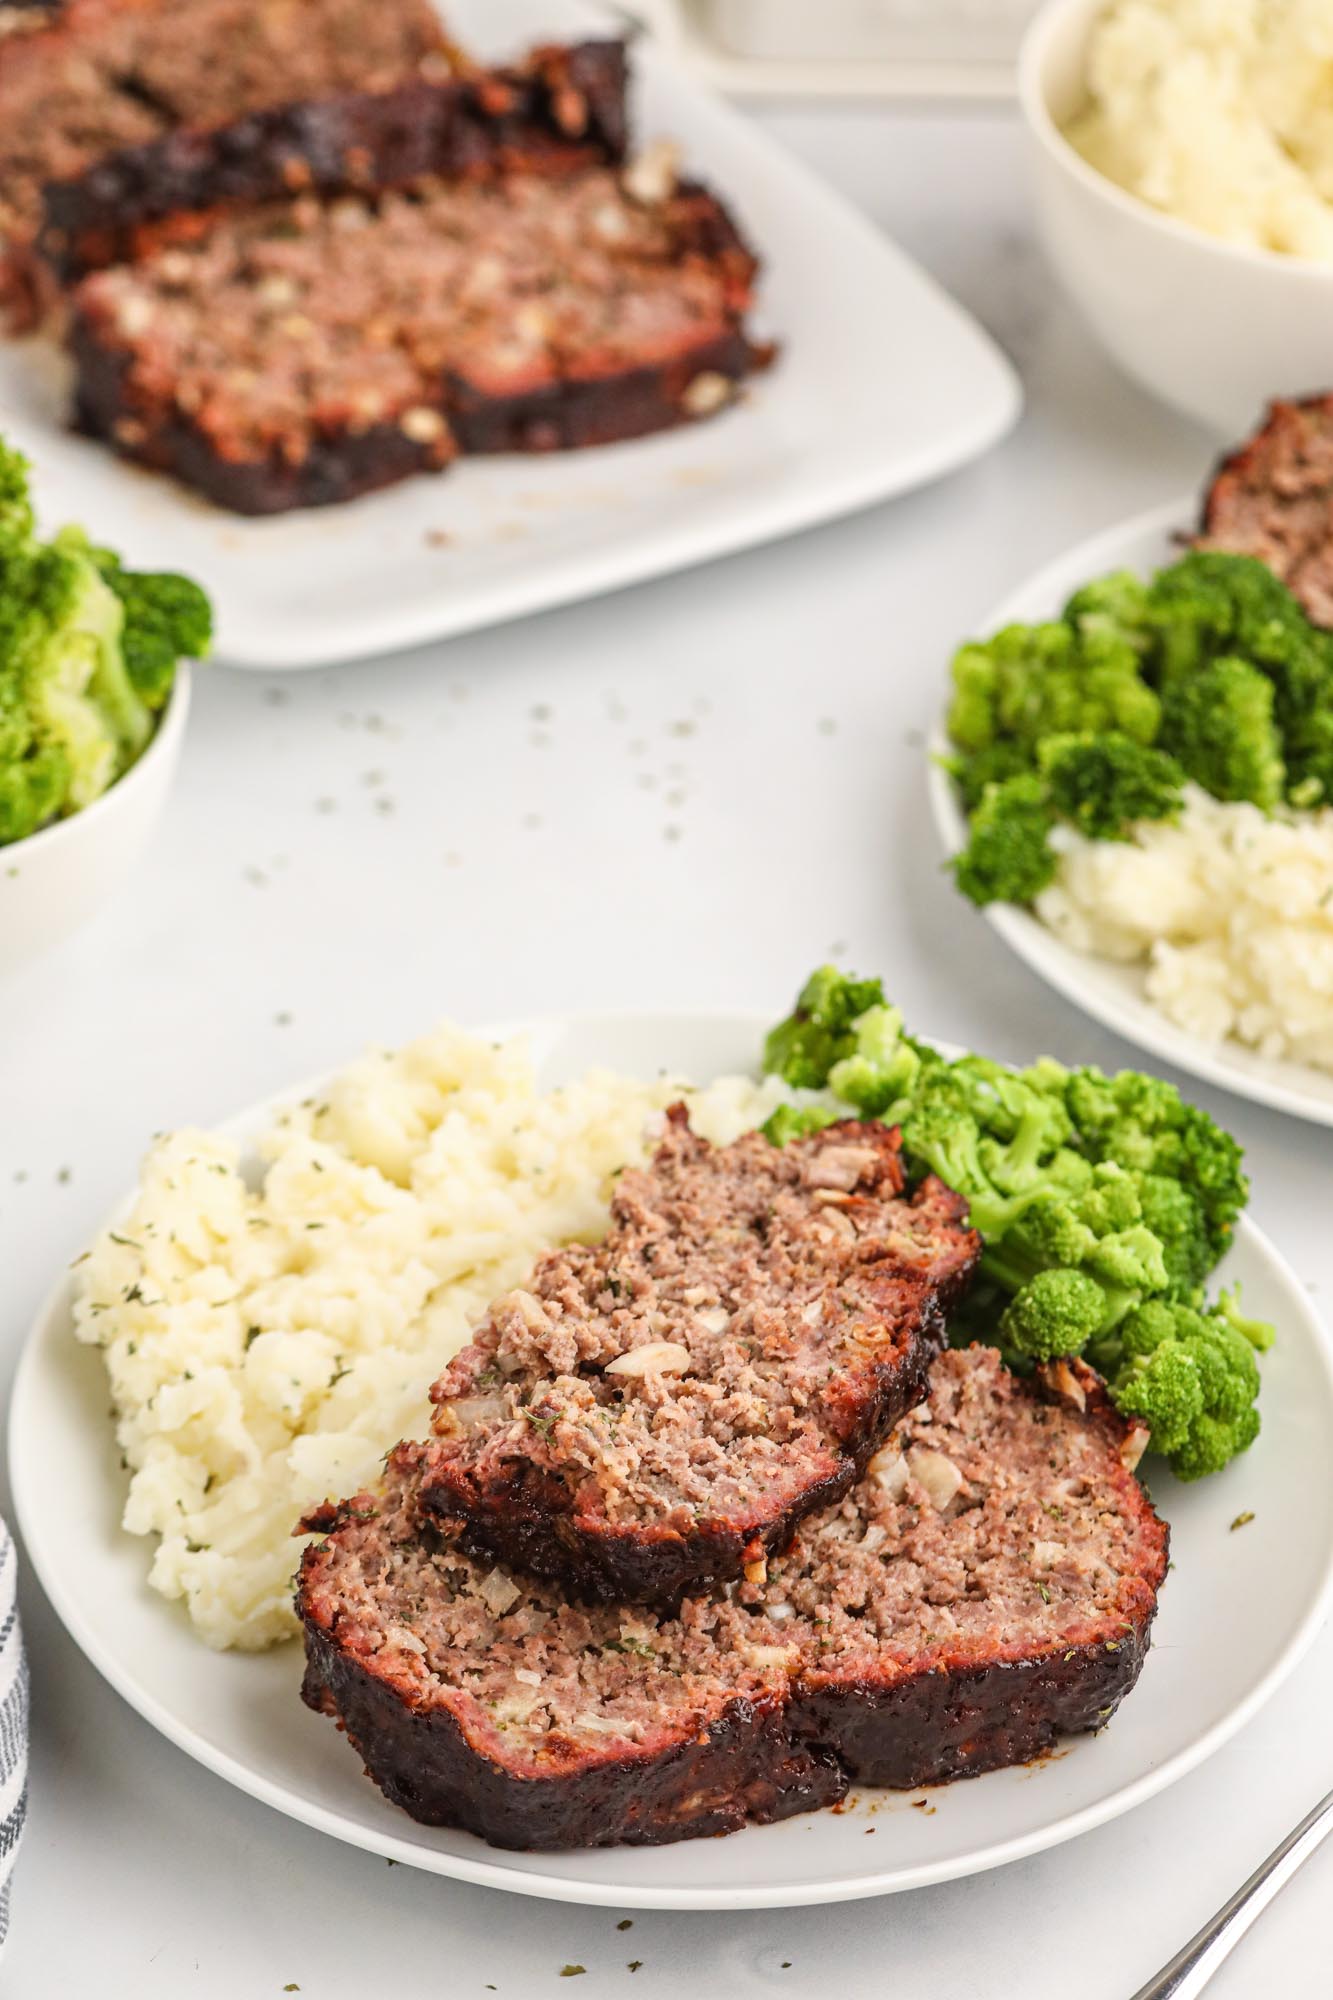 2 portions of BBQ glazed smoked meatloaf, with mashed potatoes, and broccoli on the side.